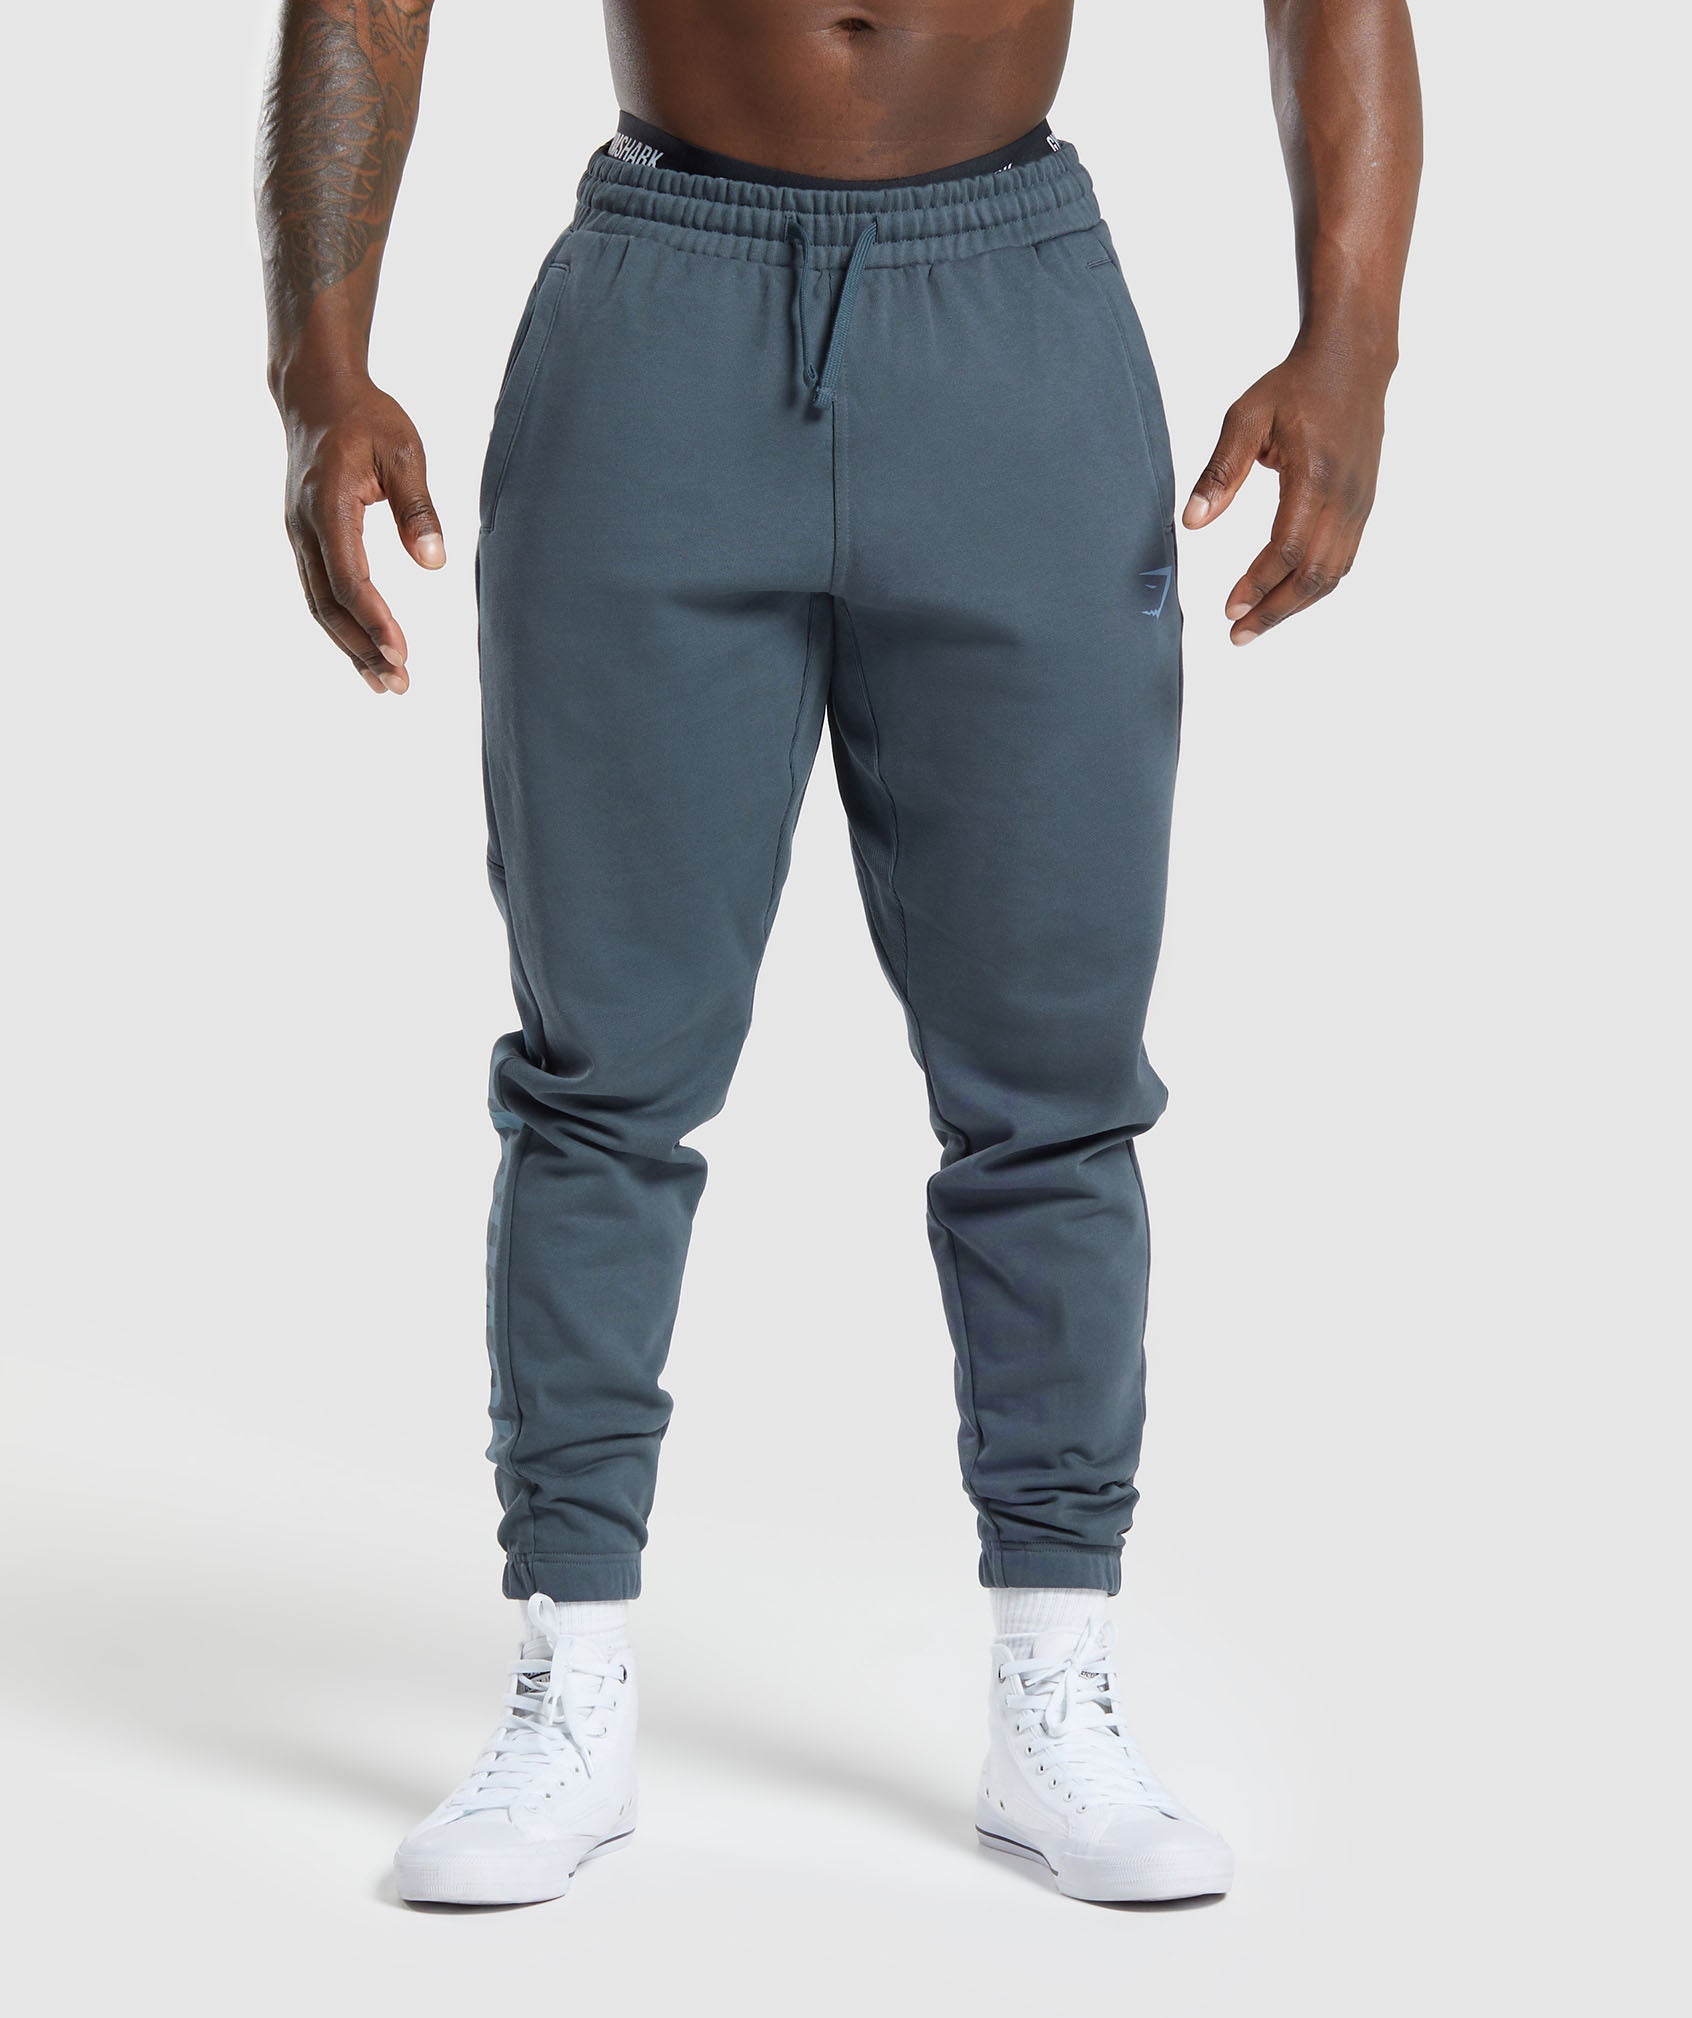 Gymshark Power Joggers - Black Print – Client 446 100K products